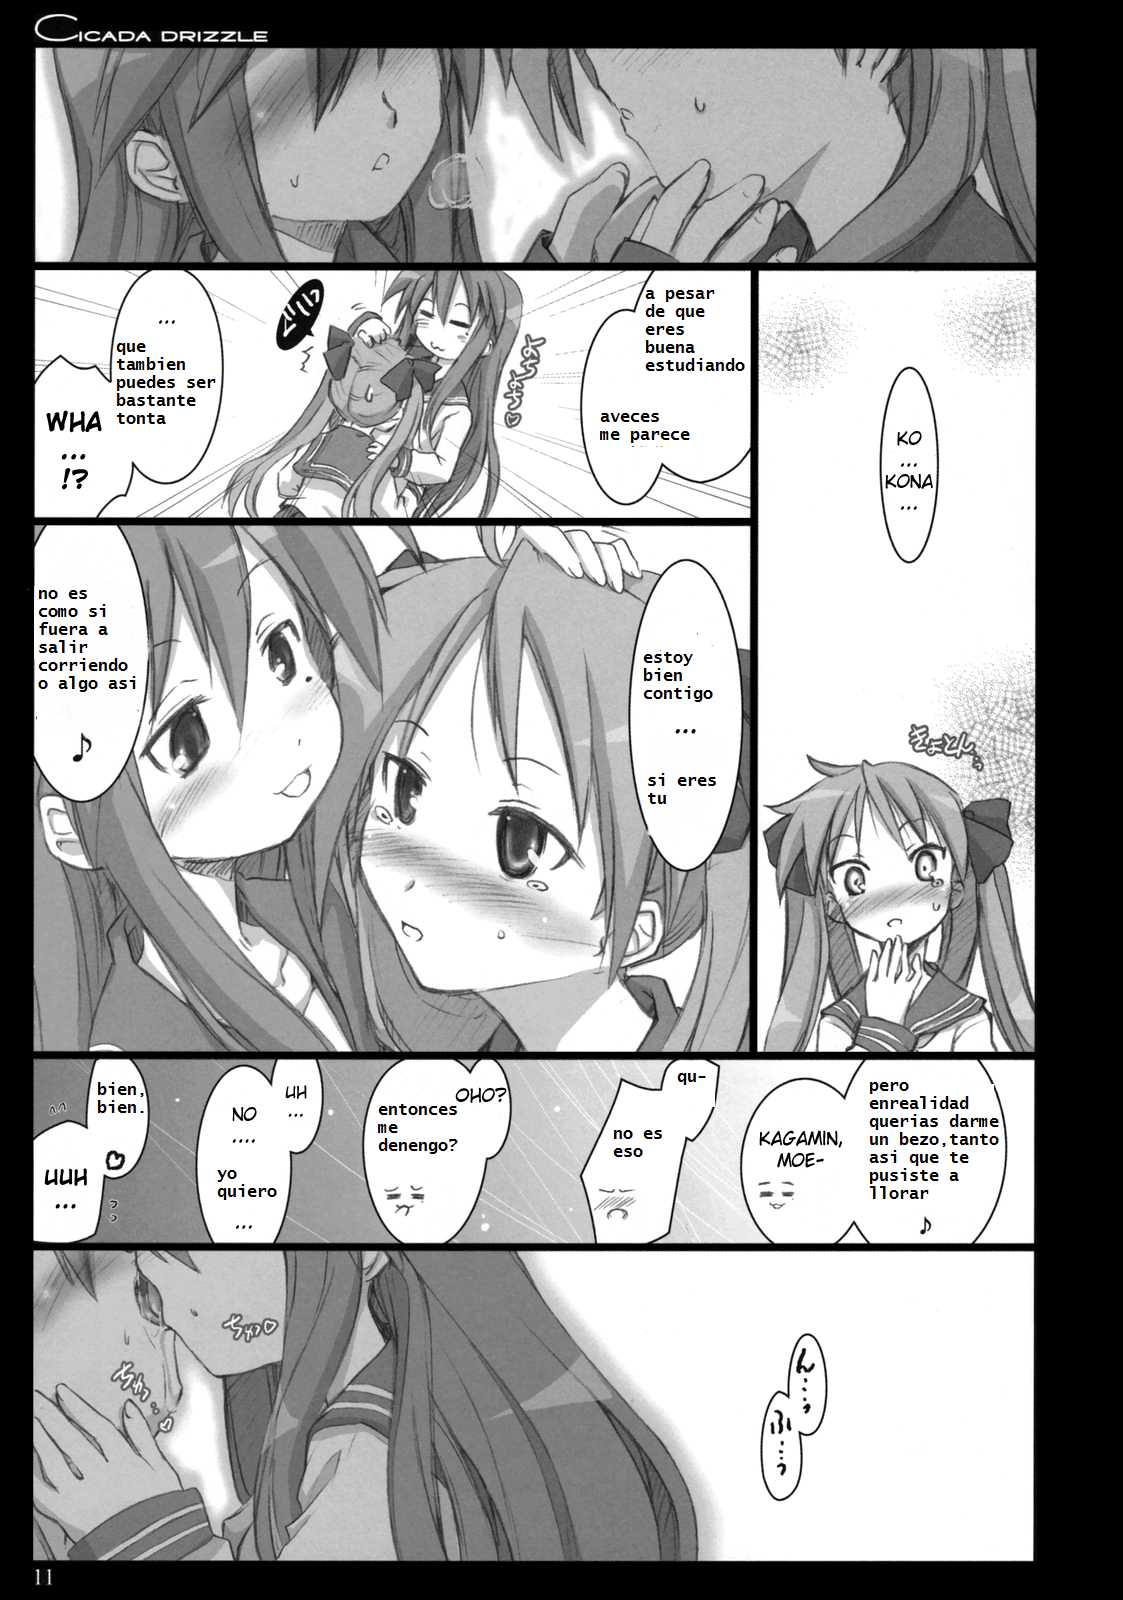 cicada drizzle (doujins lucky star) [by RemSIR] 